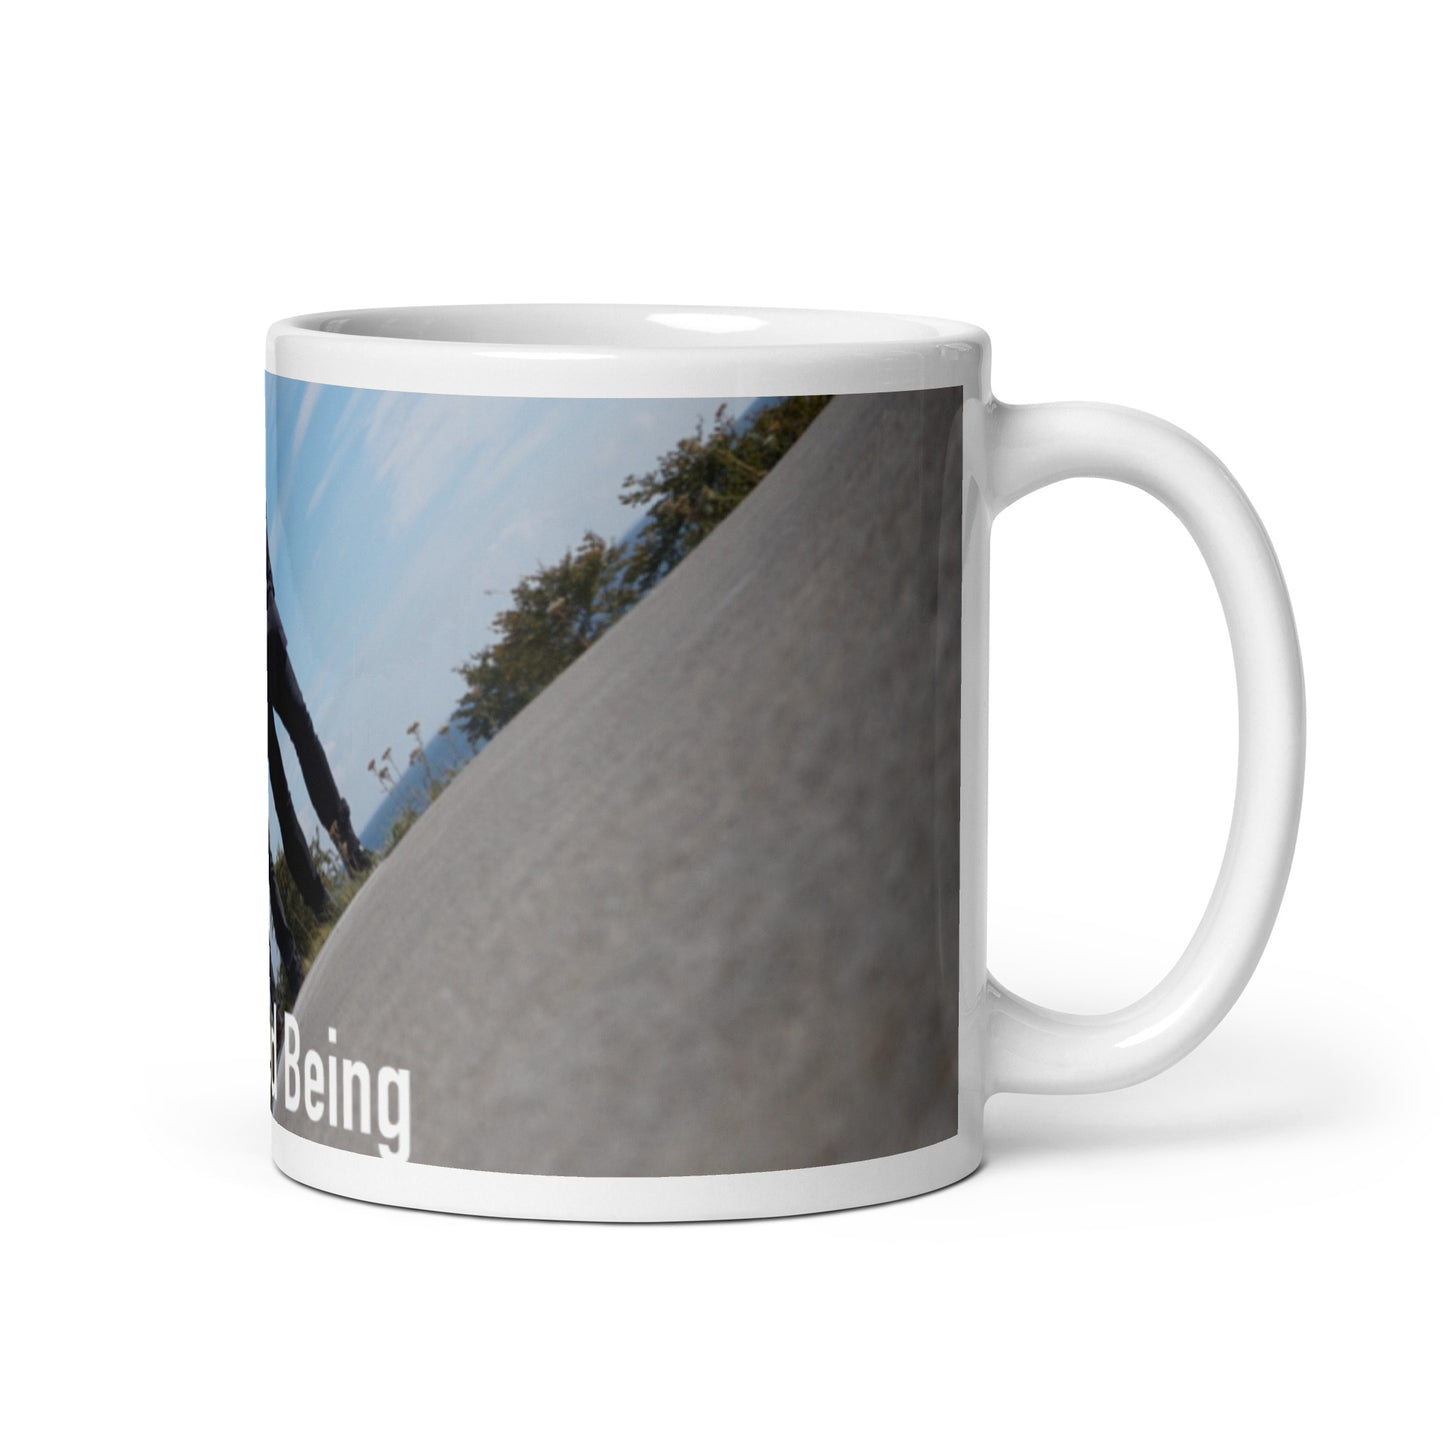 Disrupted Being, official photo and logo, White glossy mug